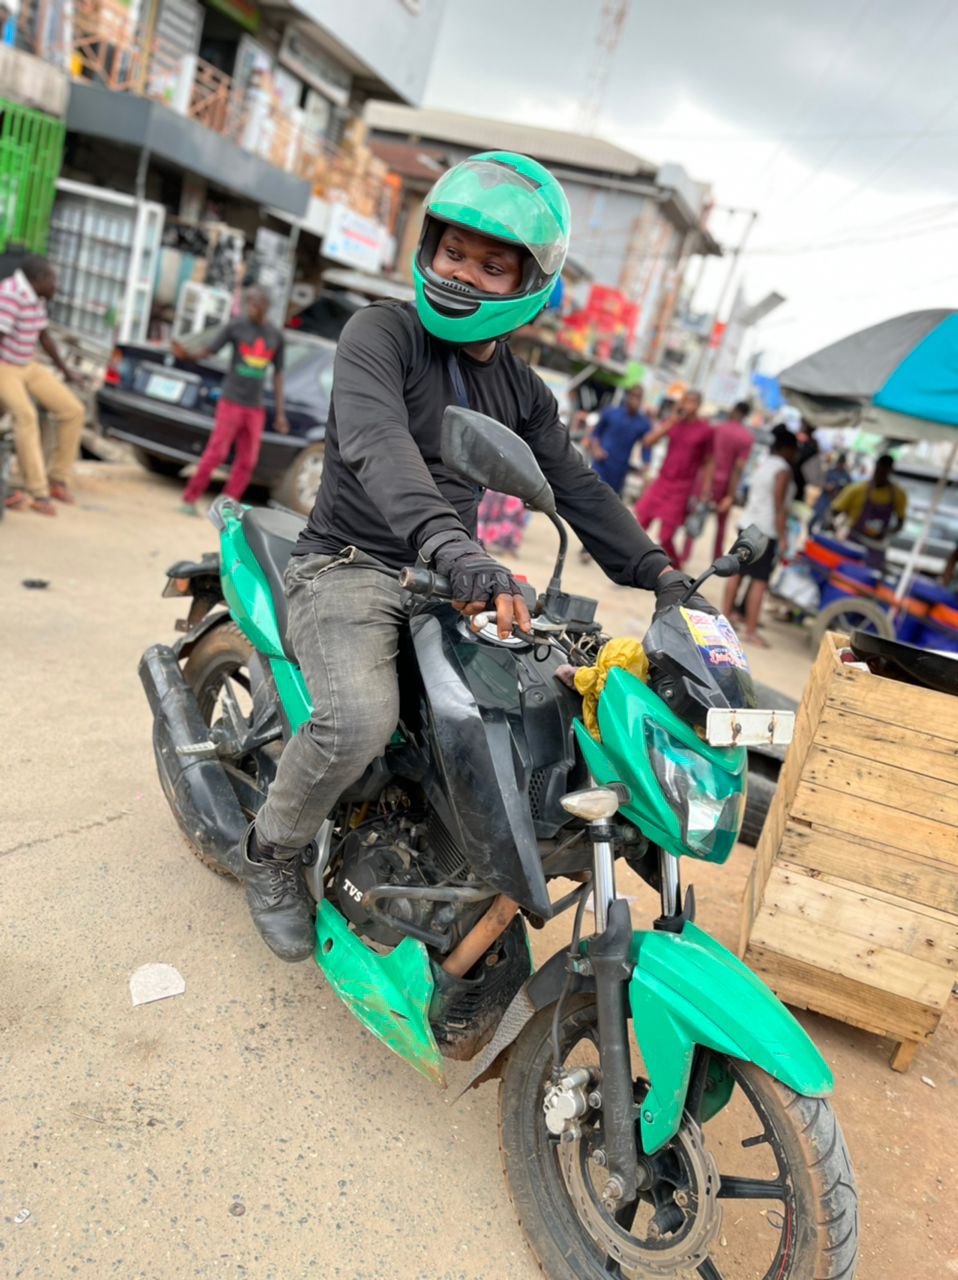 Dispatch rider on Motorcycle